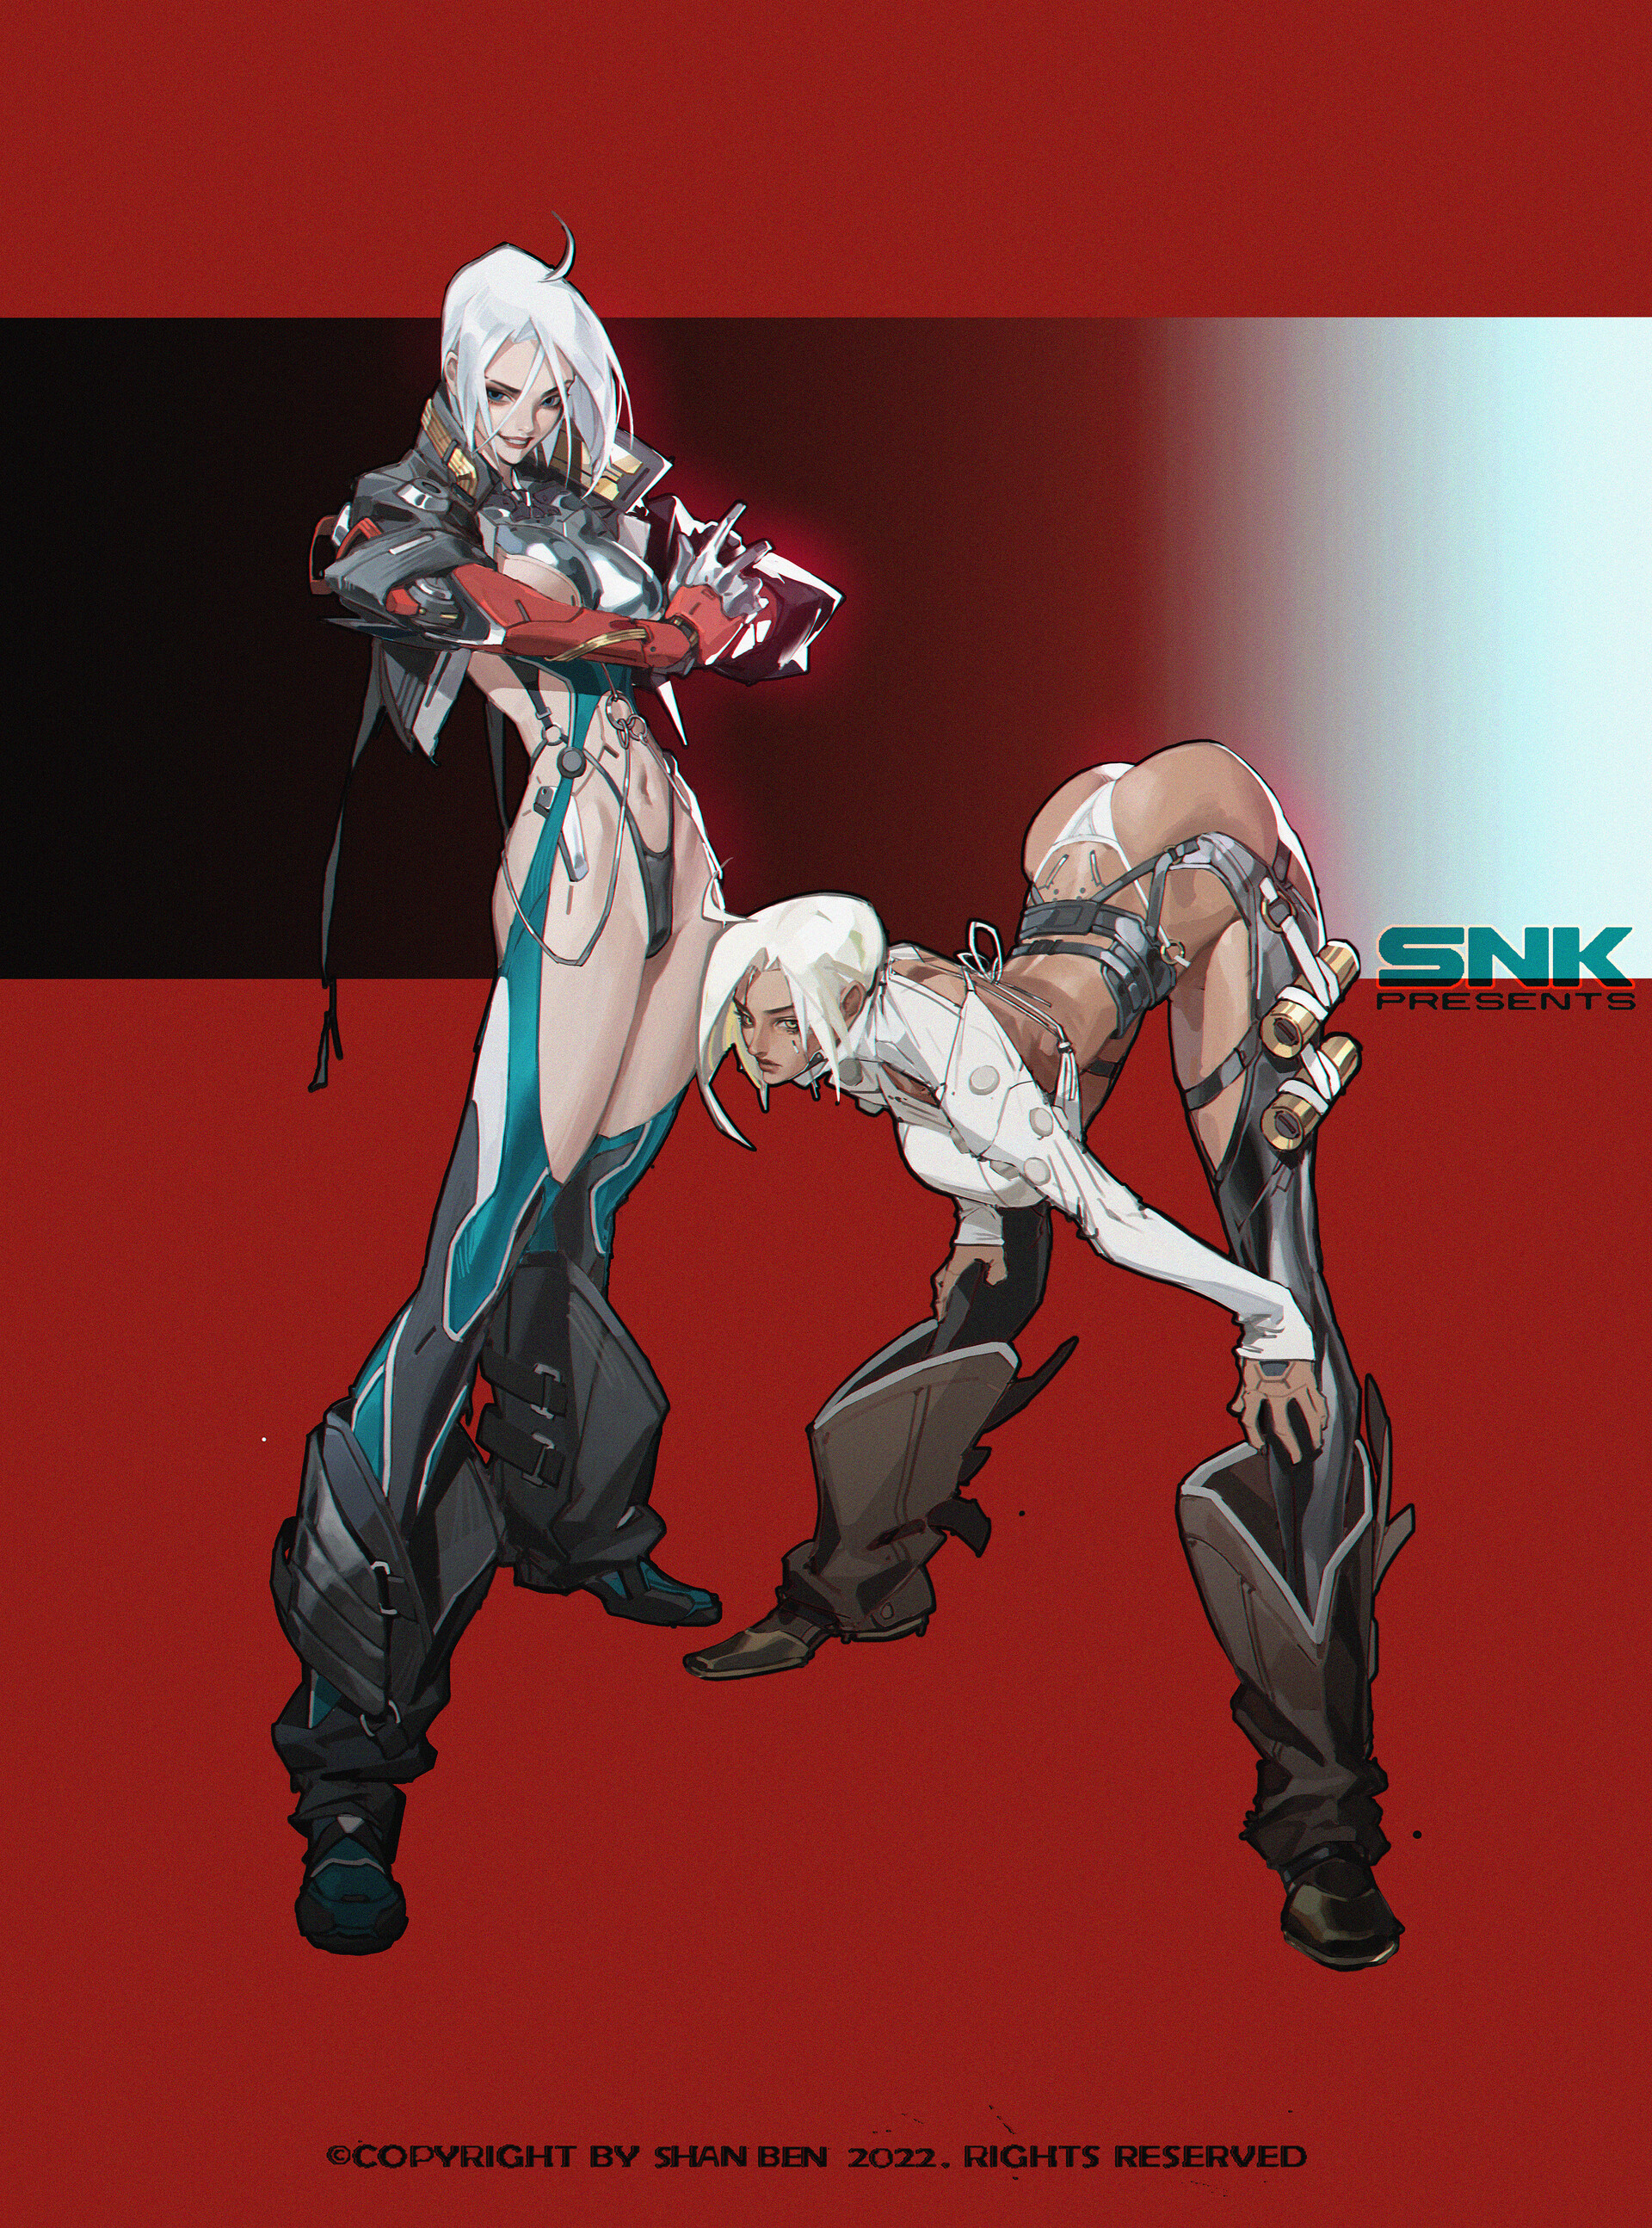 General 1920x2589 SNK women two women 2022 (year) video games video game characters fan art video game girls Shan Ben bent over ass skimpy clothes